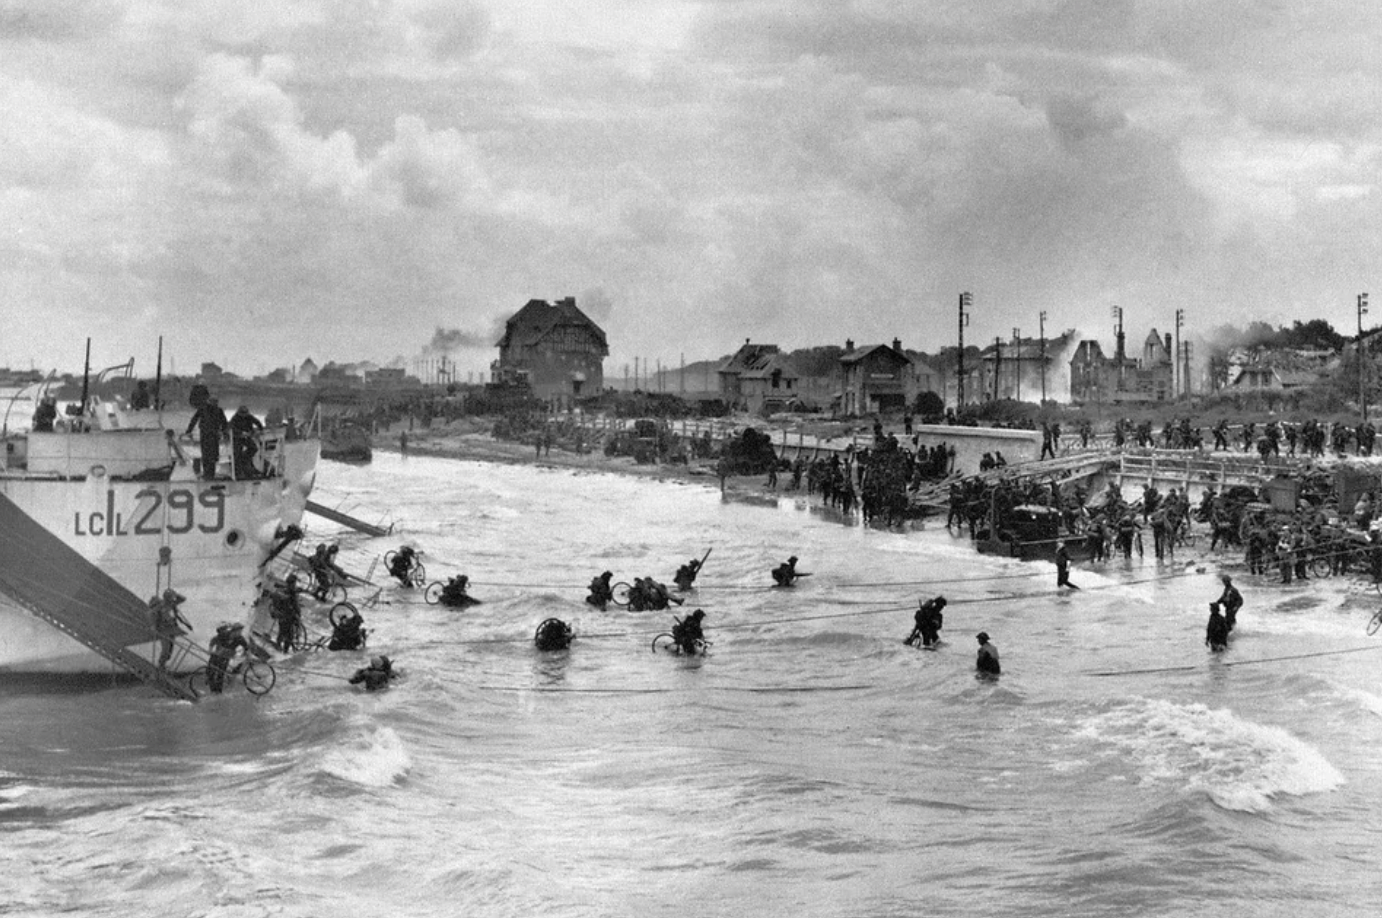 Canadian soldiers from the 9th Brigade land with their bicycles at Juno Beach.